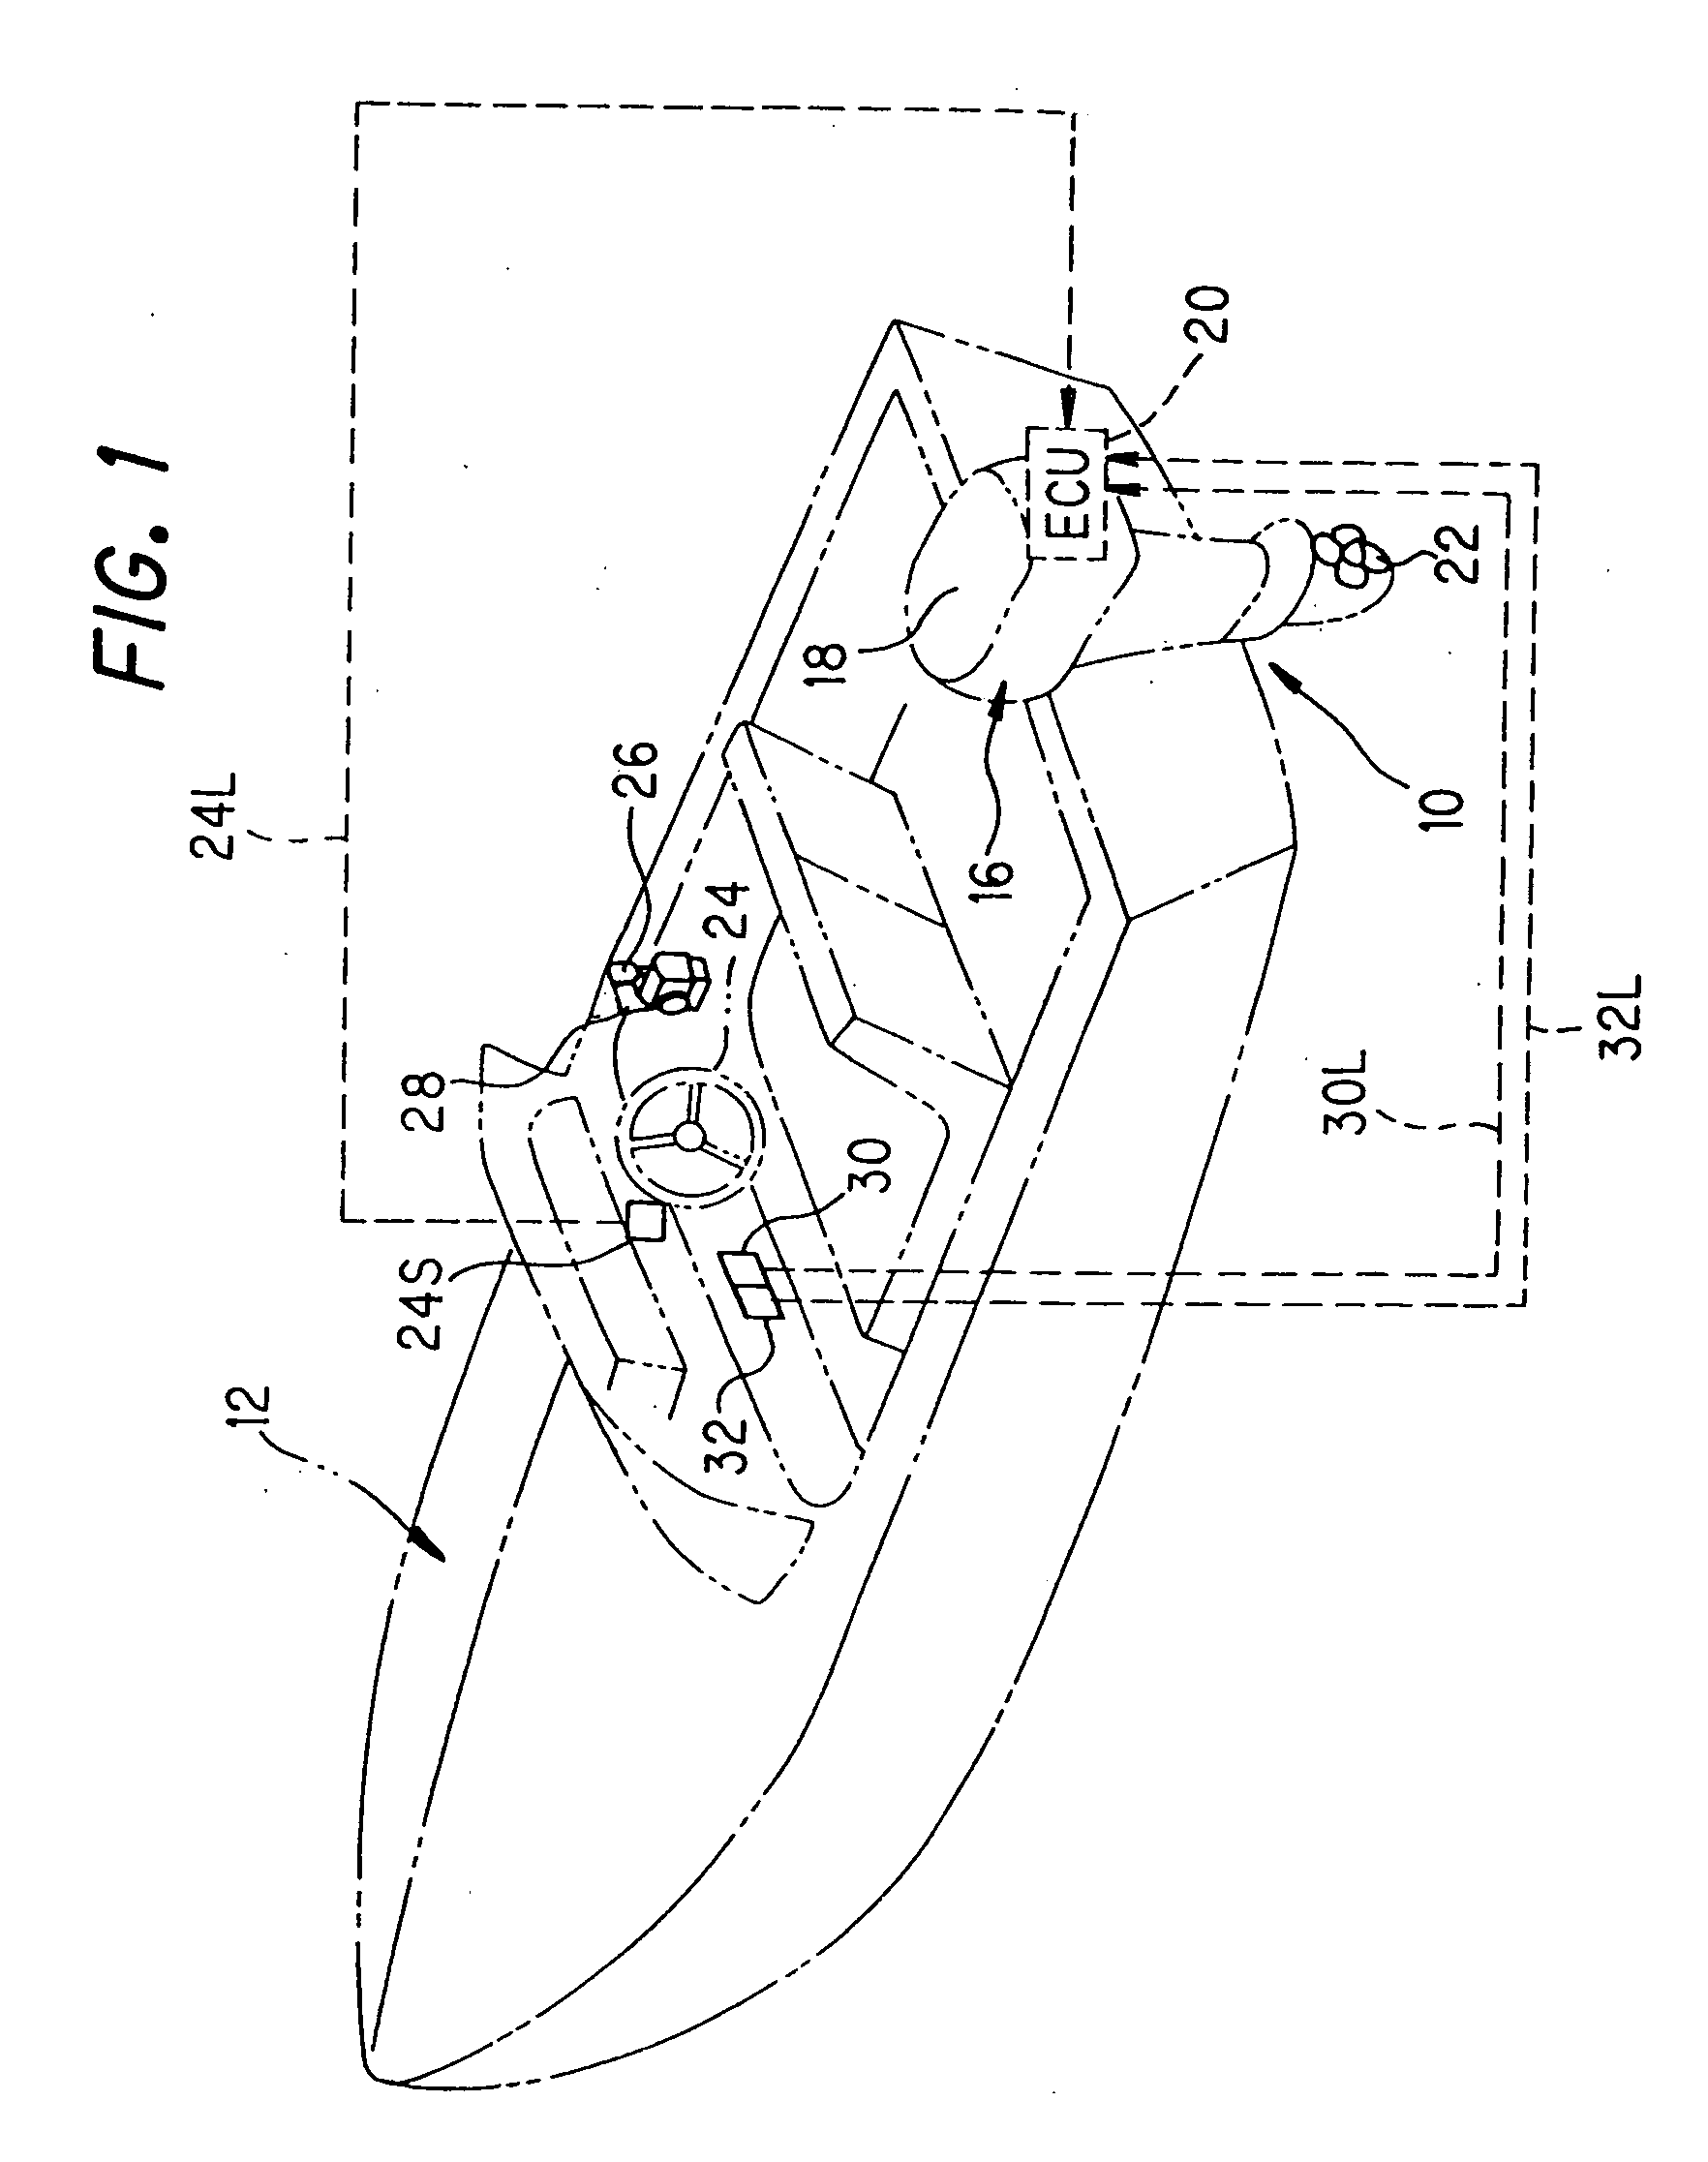 Outboard motor steering system